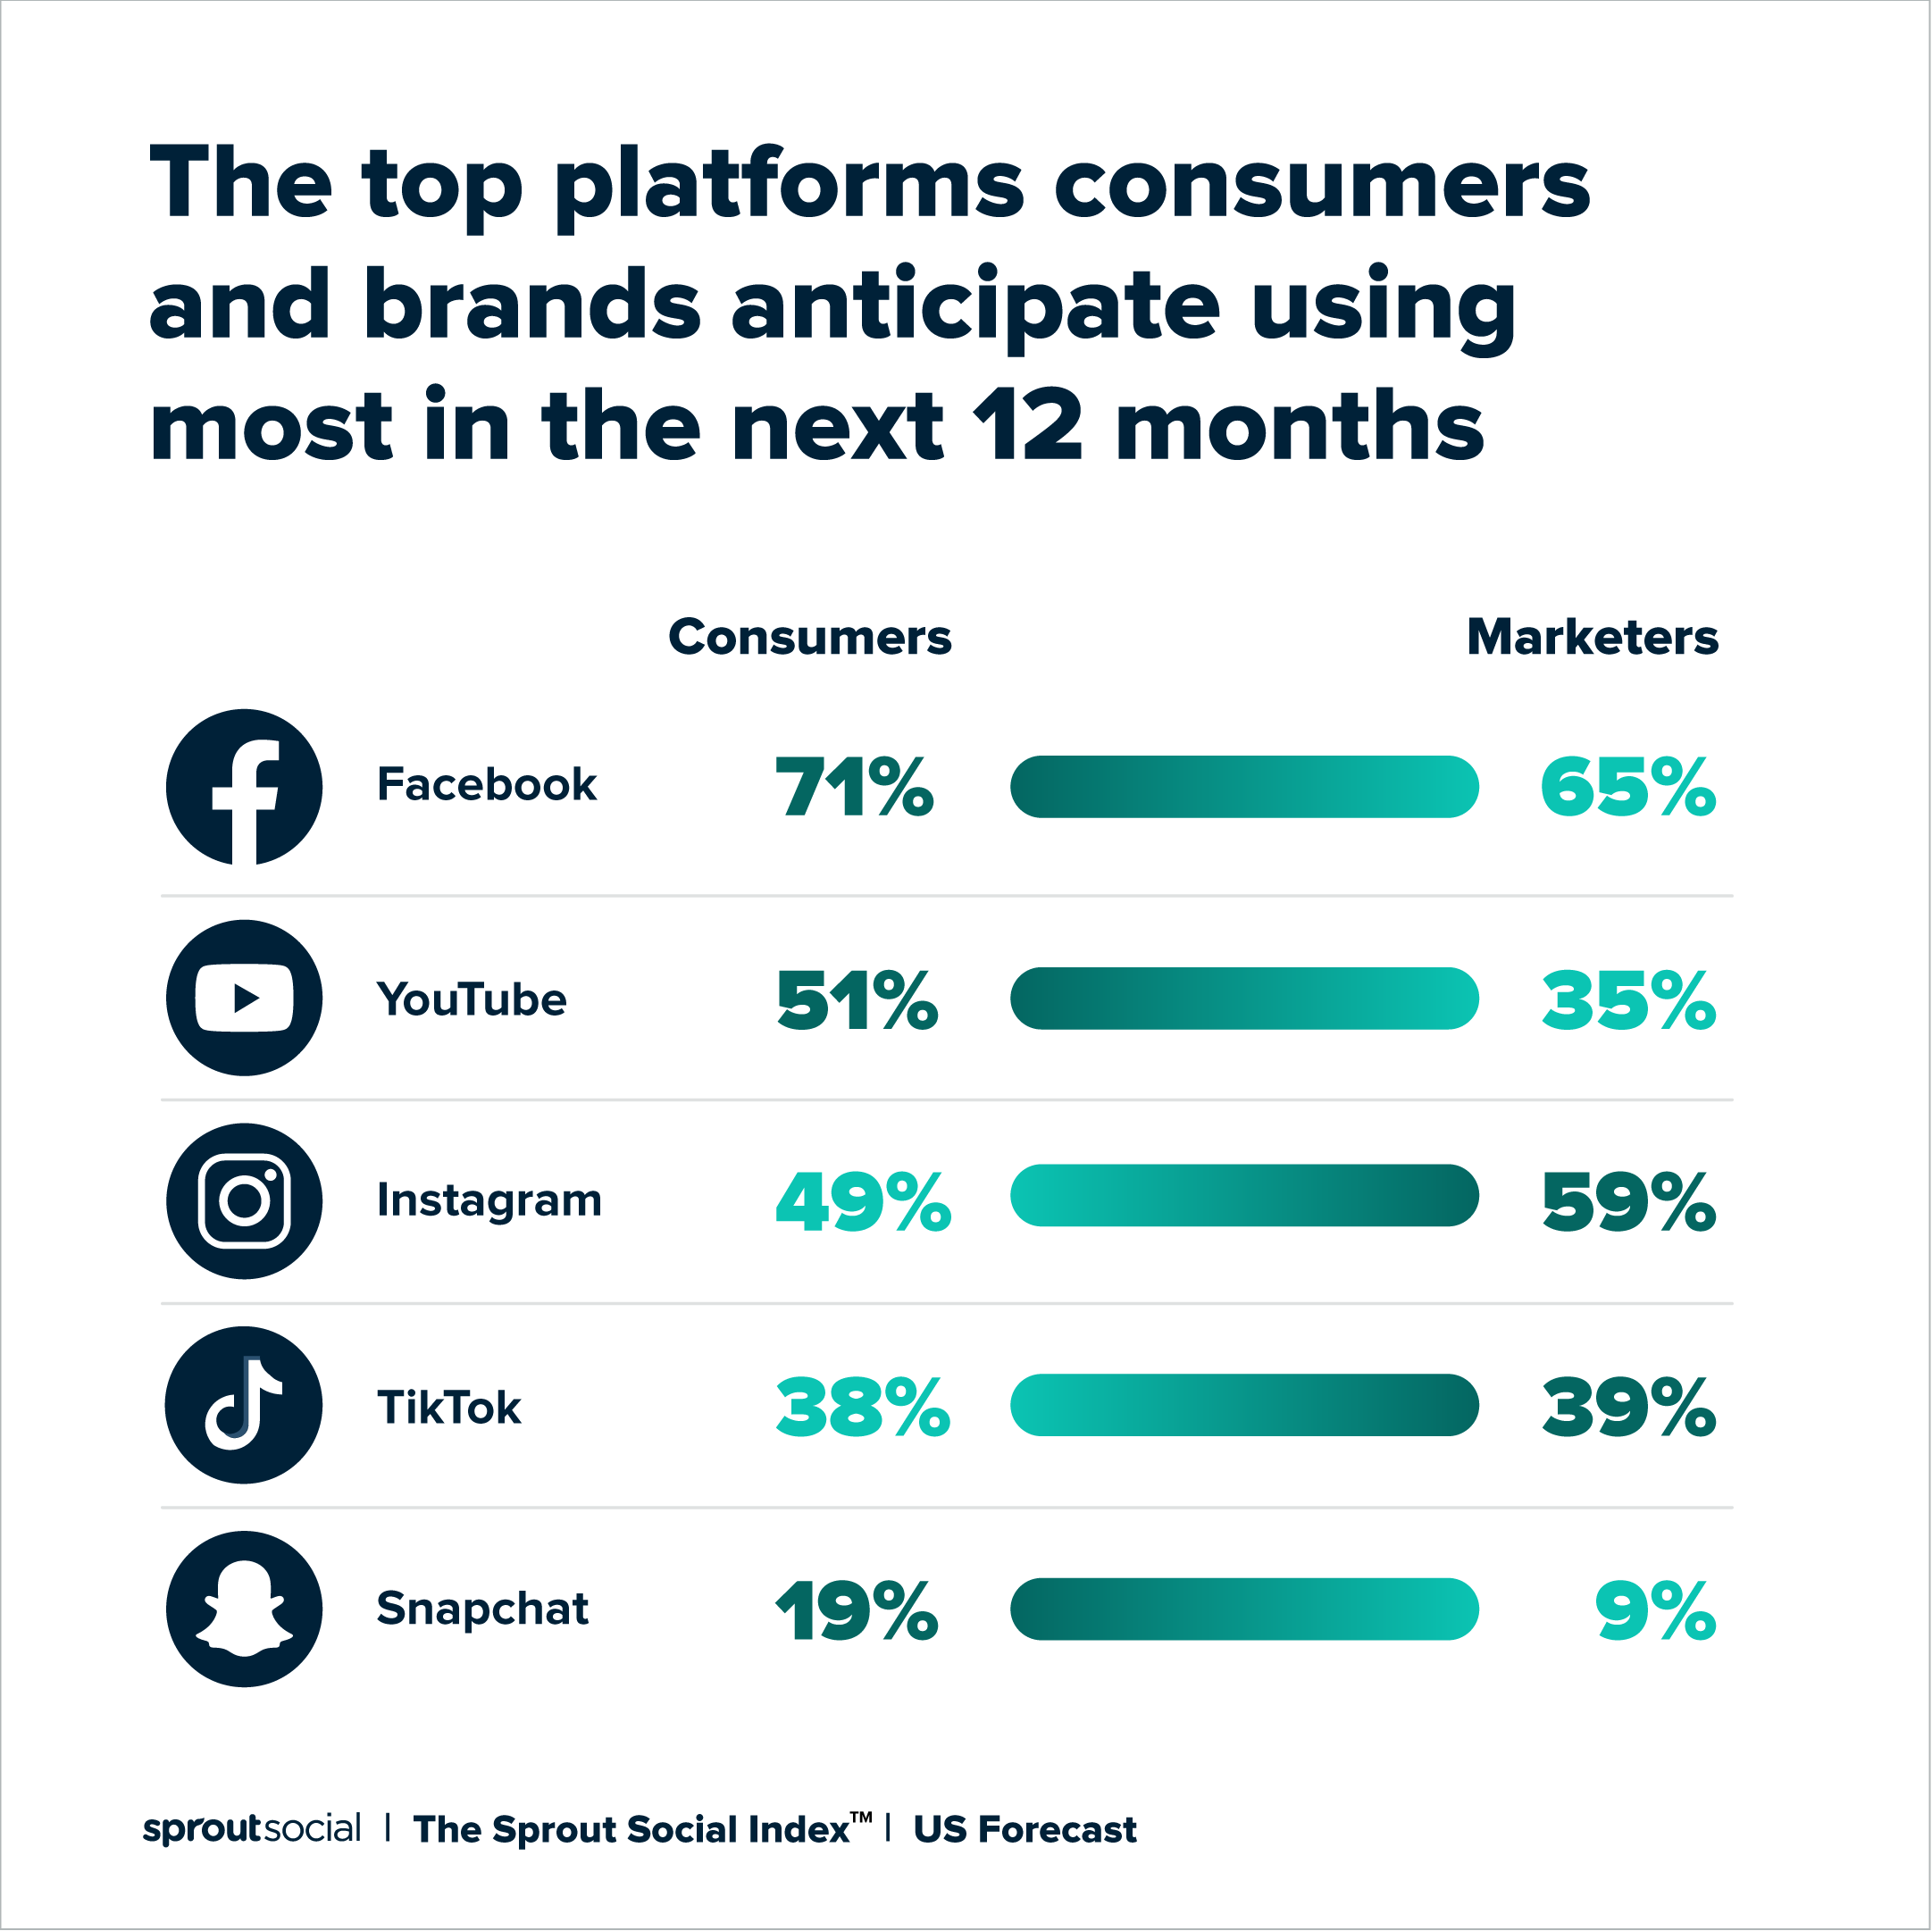 Social Media Platforms to Use. Source: Sprout Social